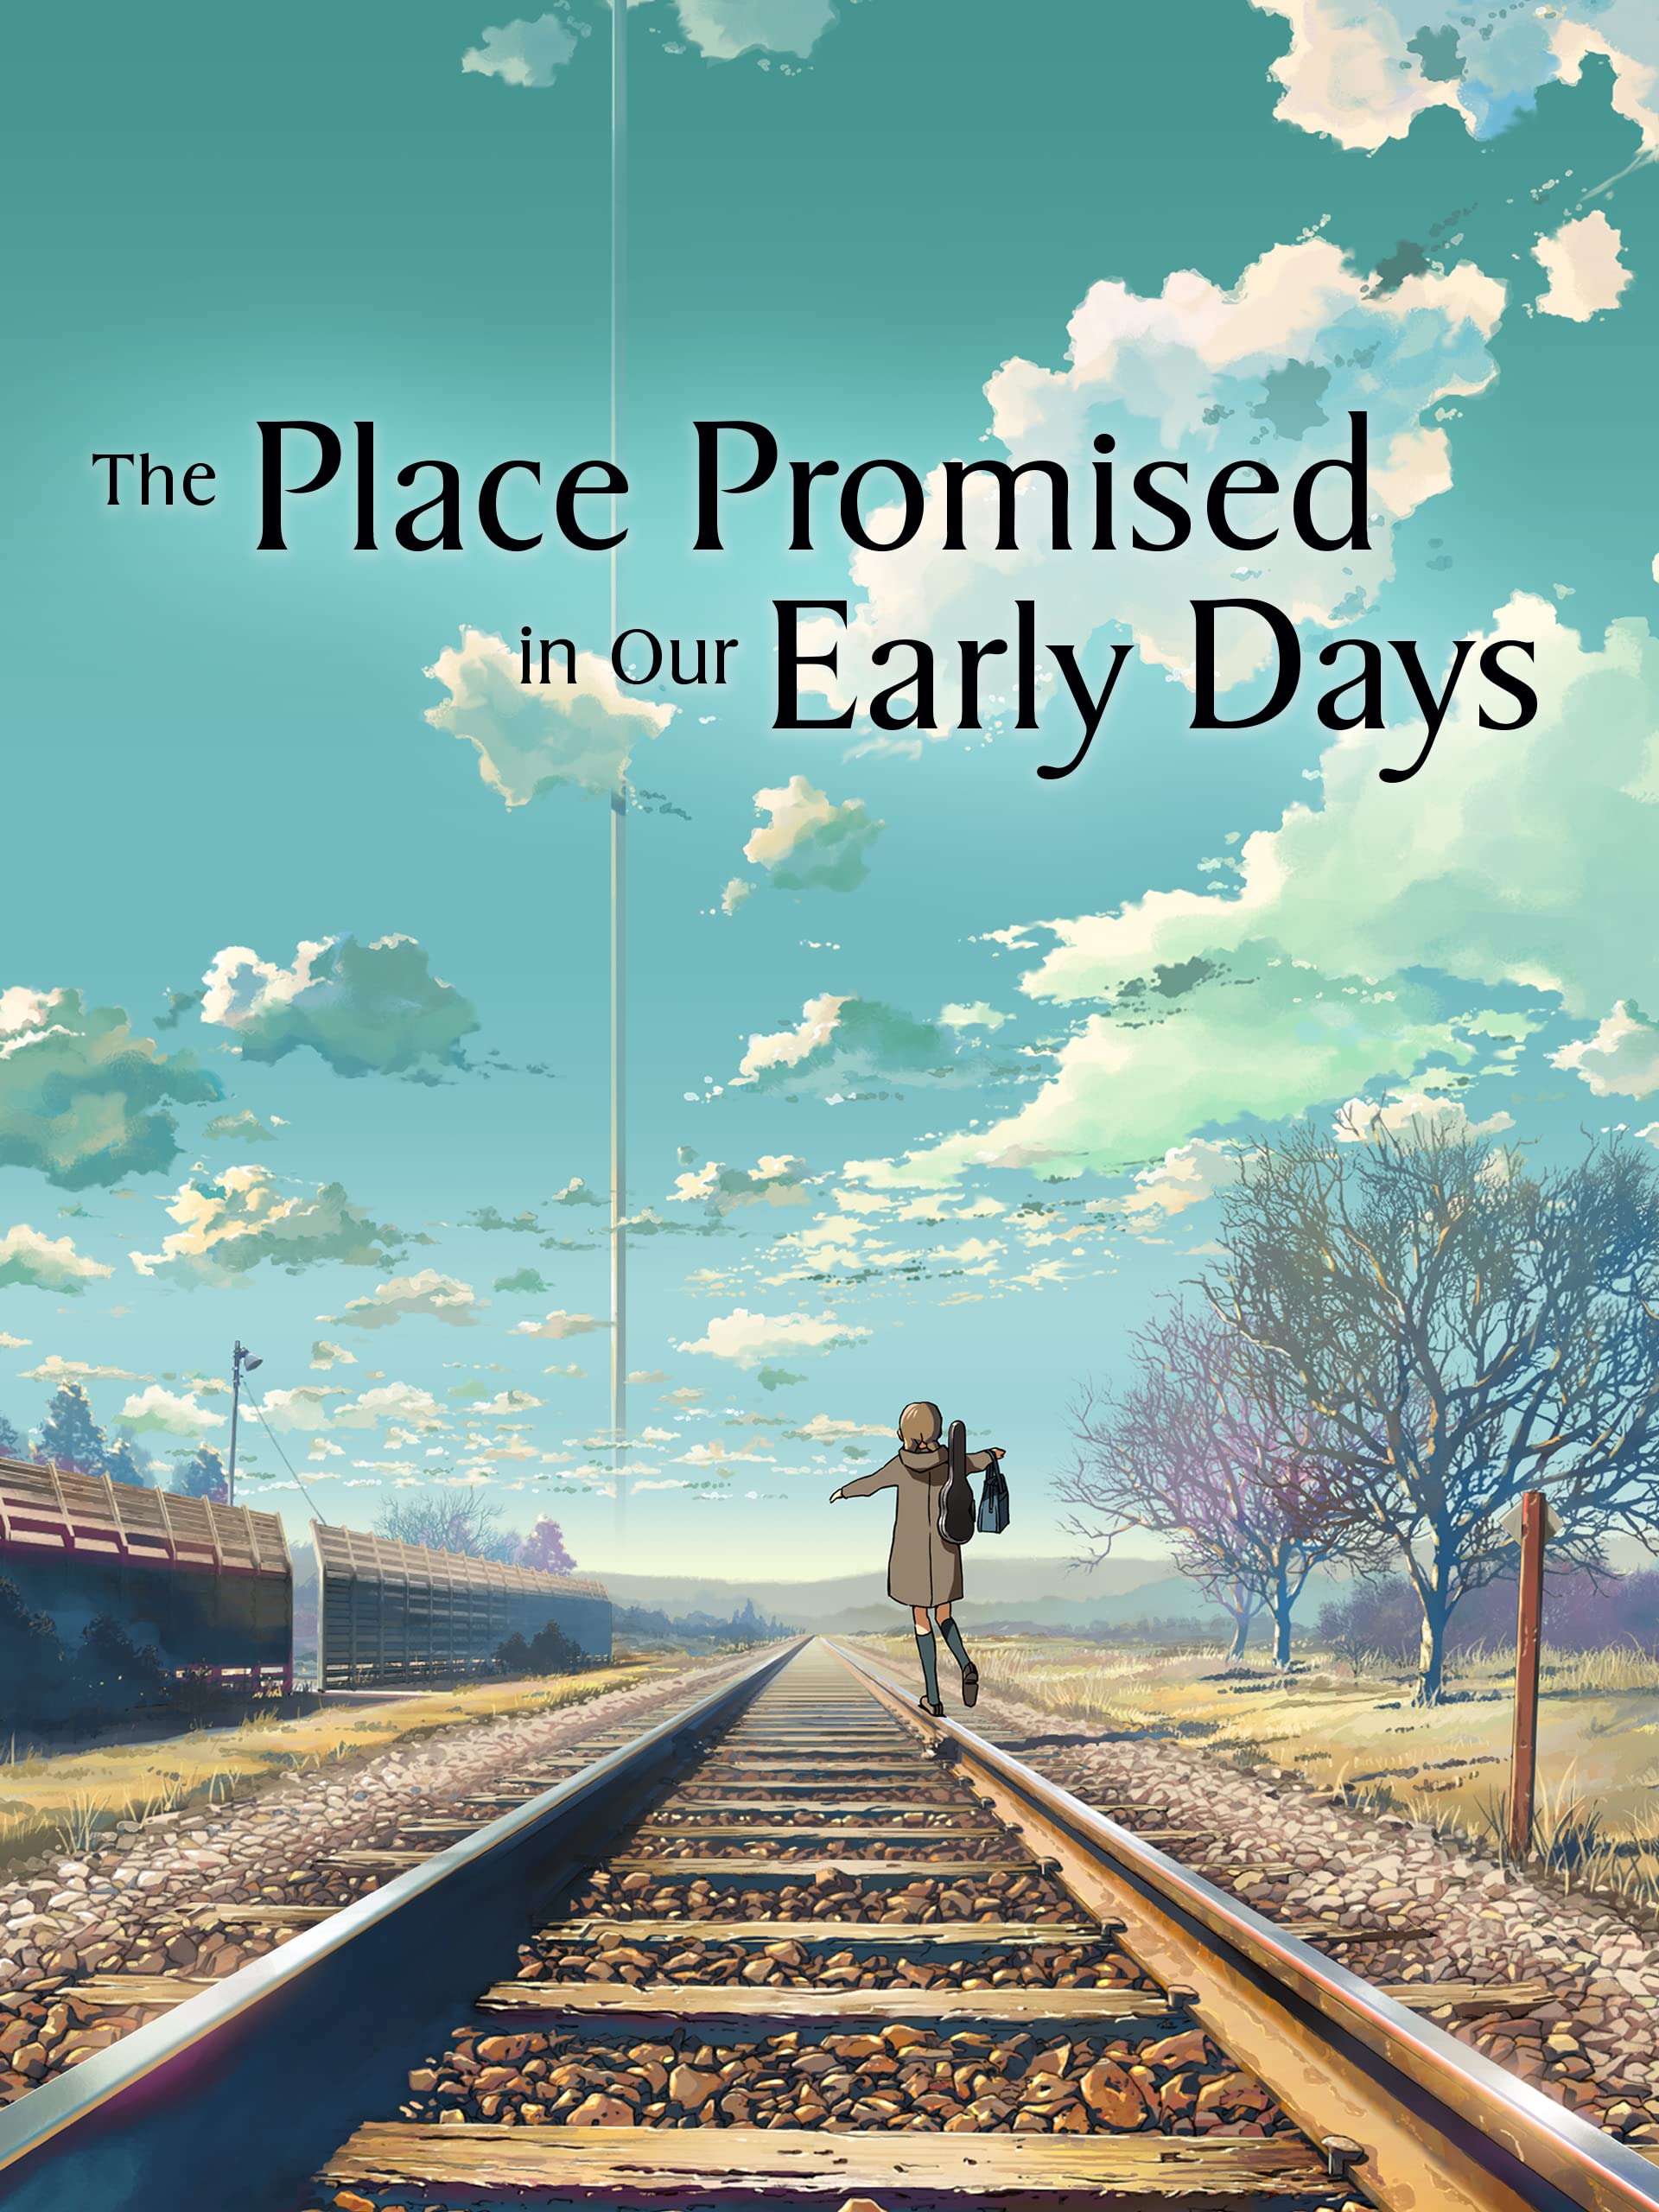 HD Digital Copy - The Place Promised In Our Early Days - Amazon $4.99